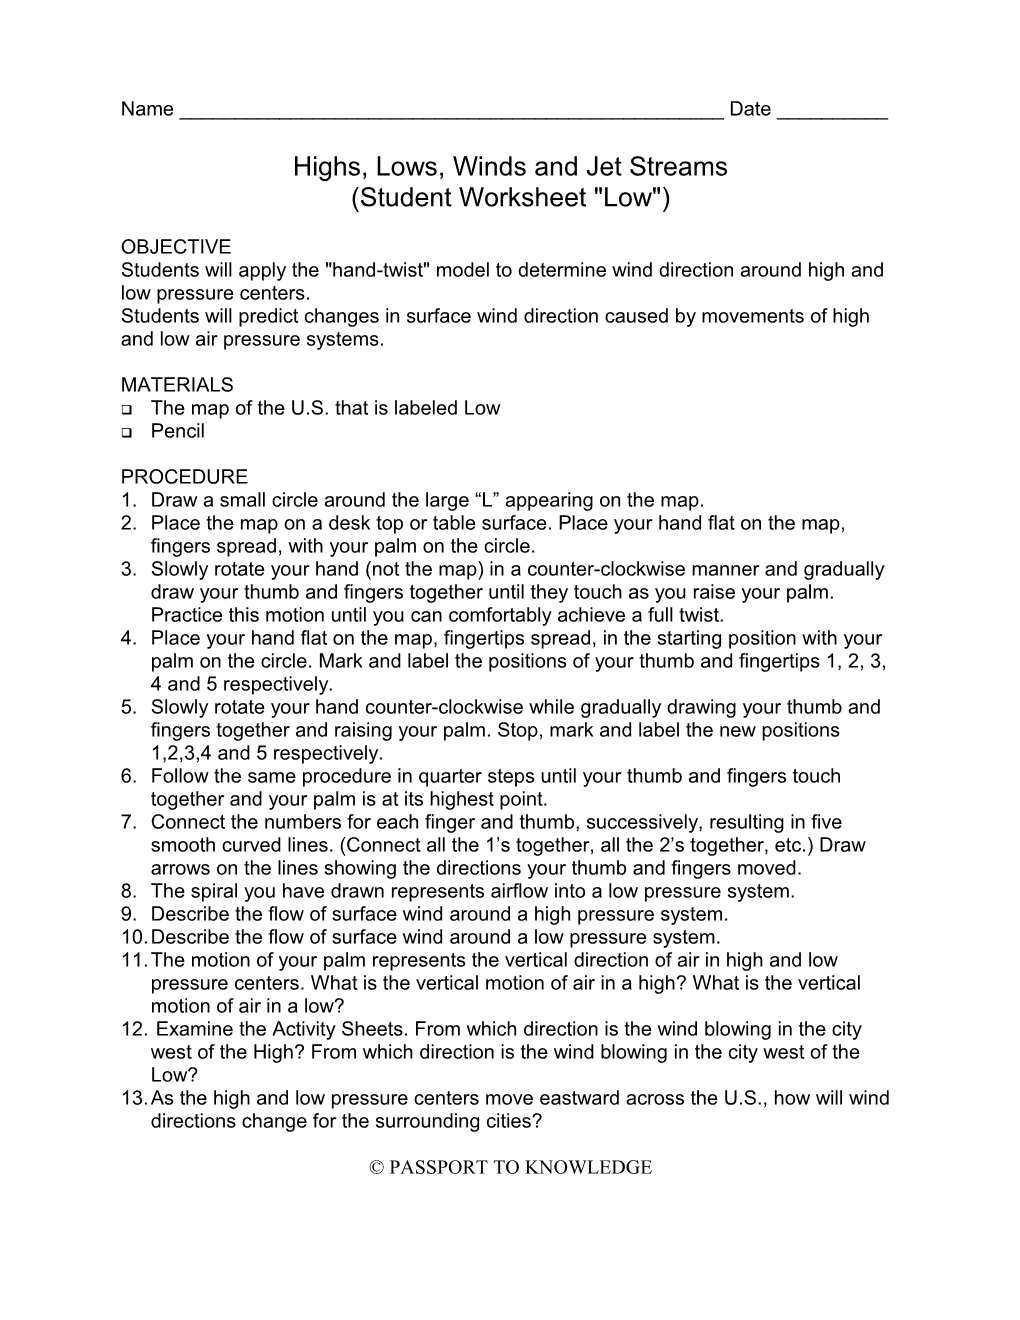 Highs, Lows, Winds and Jet Streams (Student Worksheet Low )